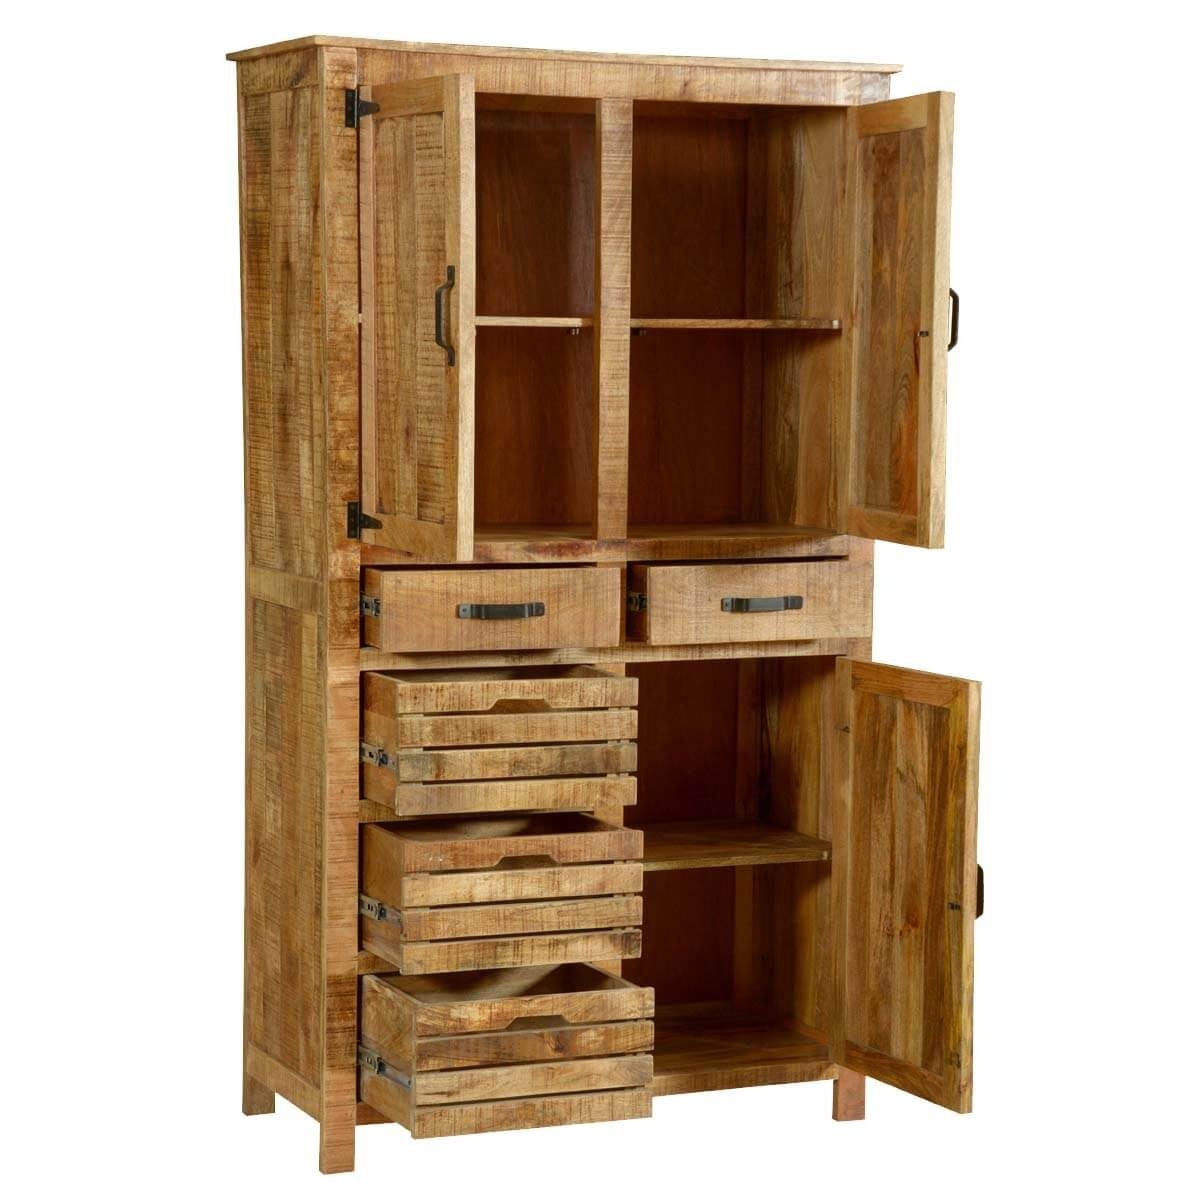 Avon pioneer rustic solid wood tall storage cabinet with 5